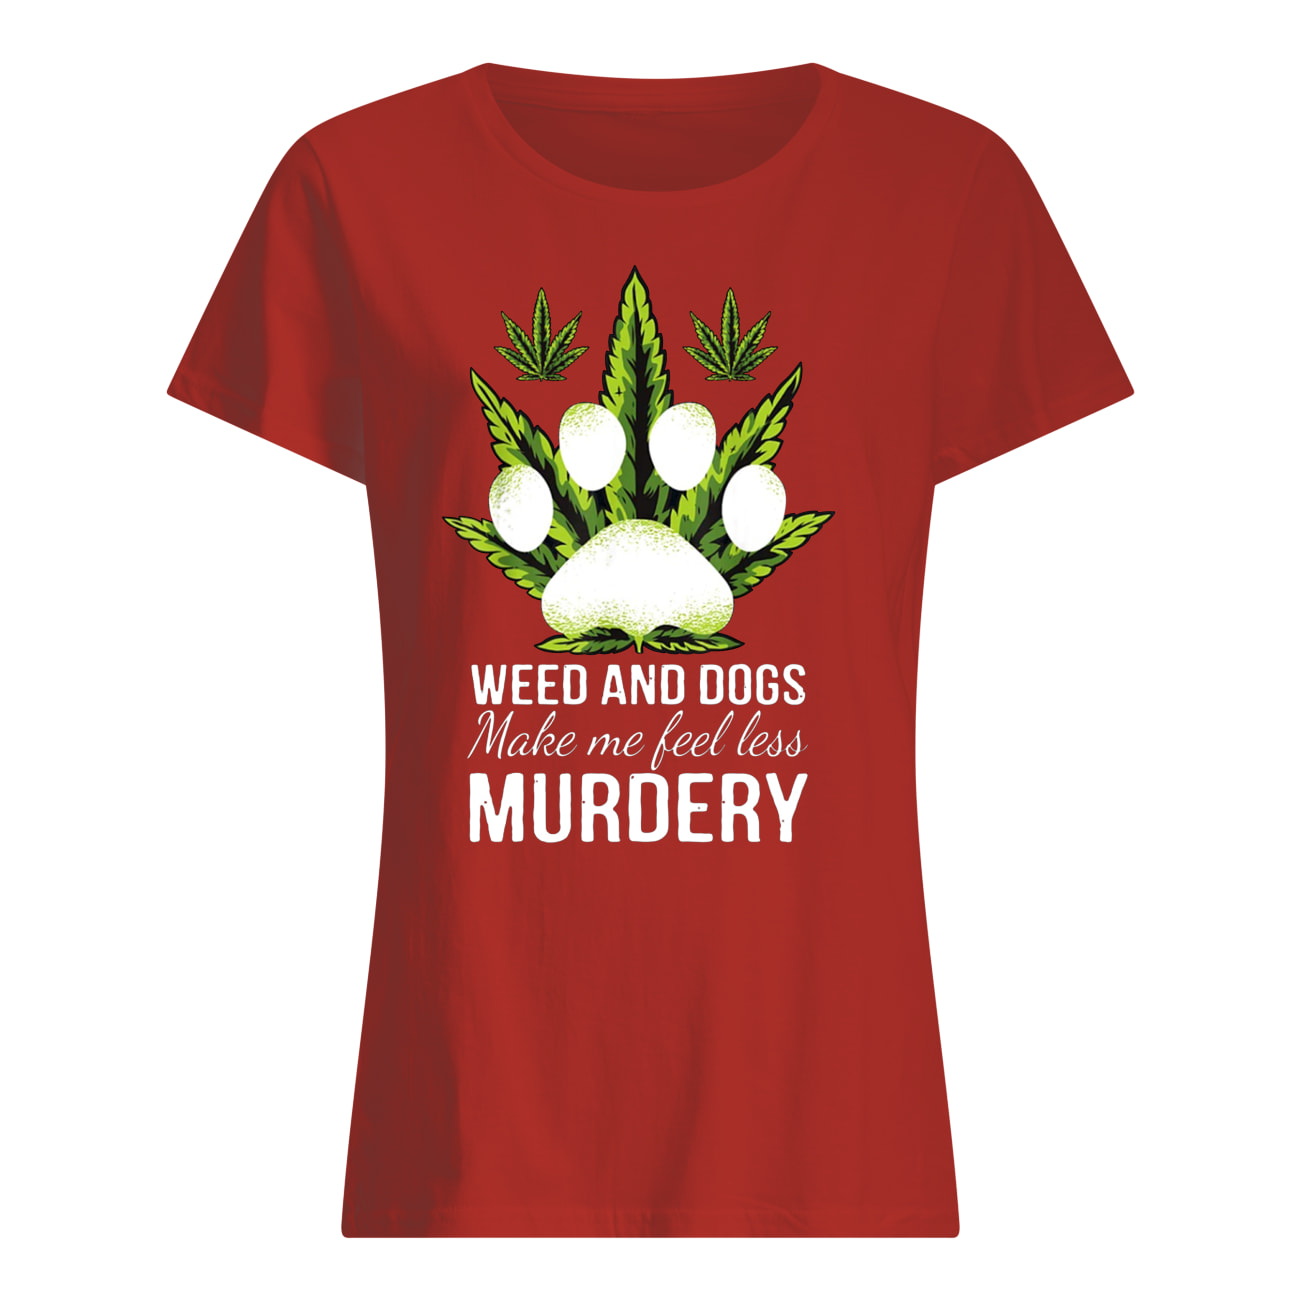 Weed and dogs make me feel less murdery womens shirt